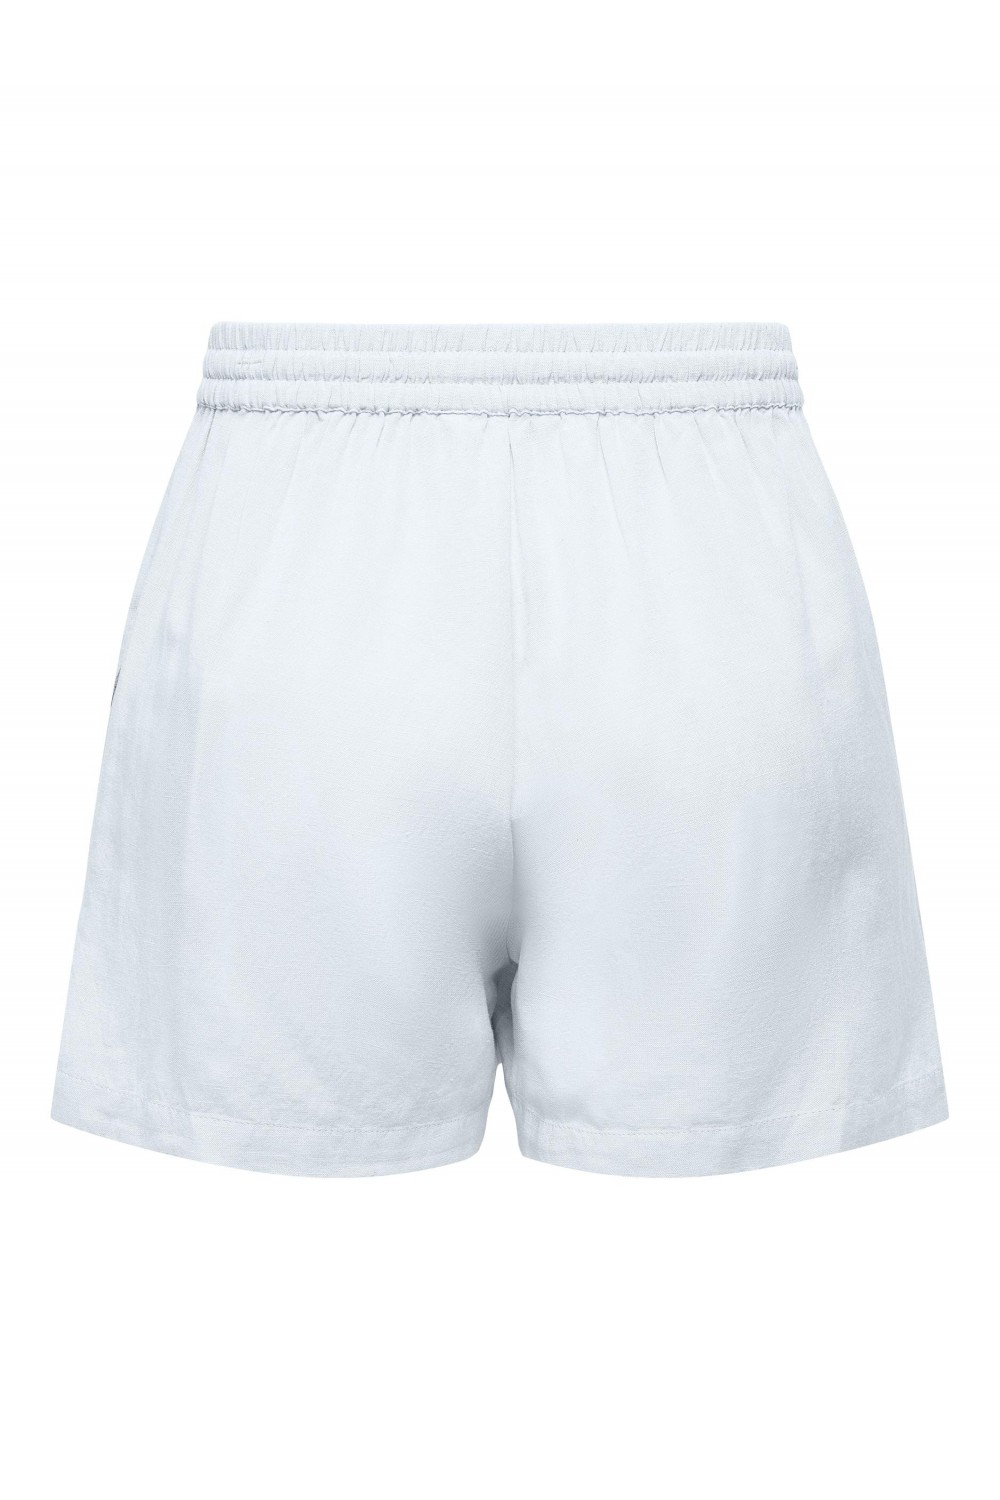 ONLY WILLOW LINEN SHORTS BRIGHT WHITE 15285847